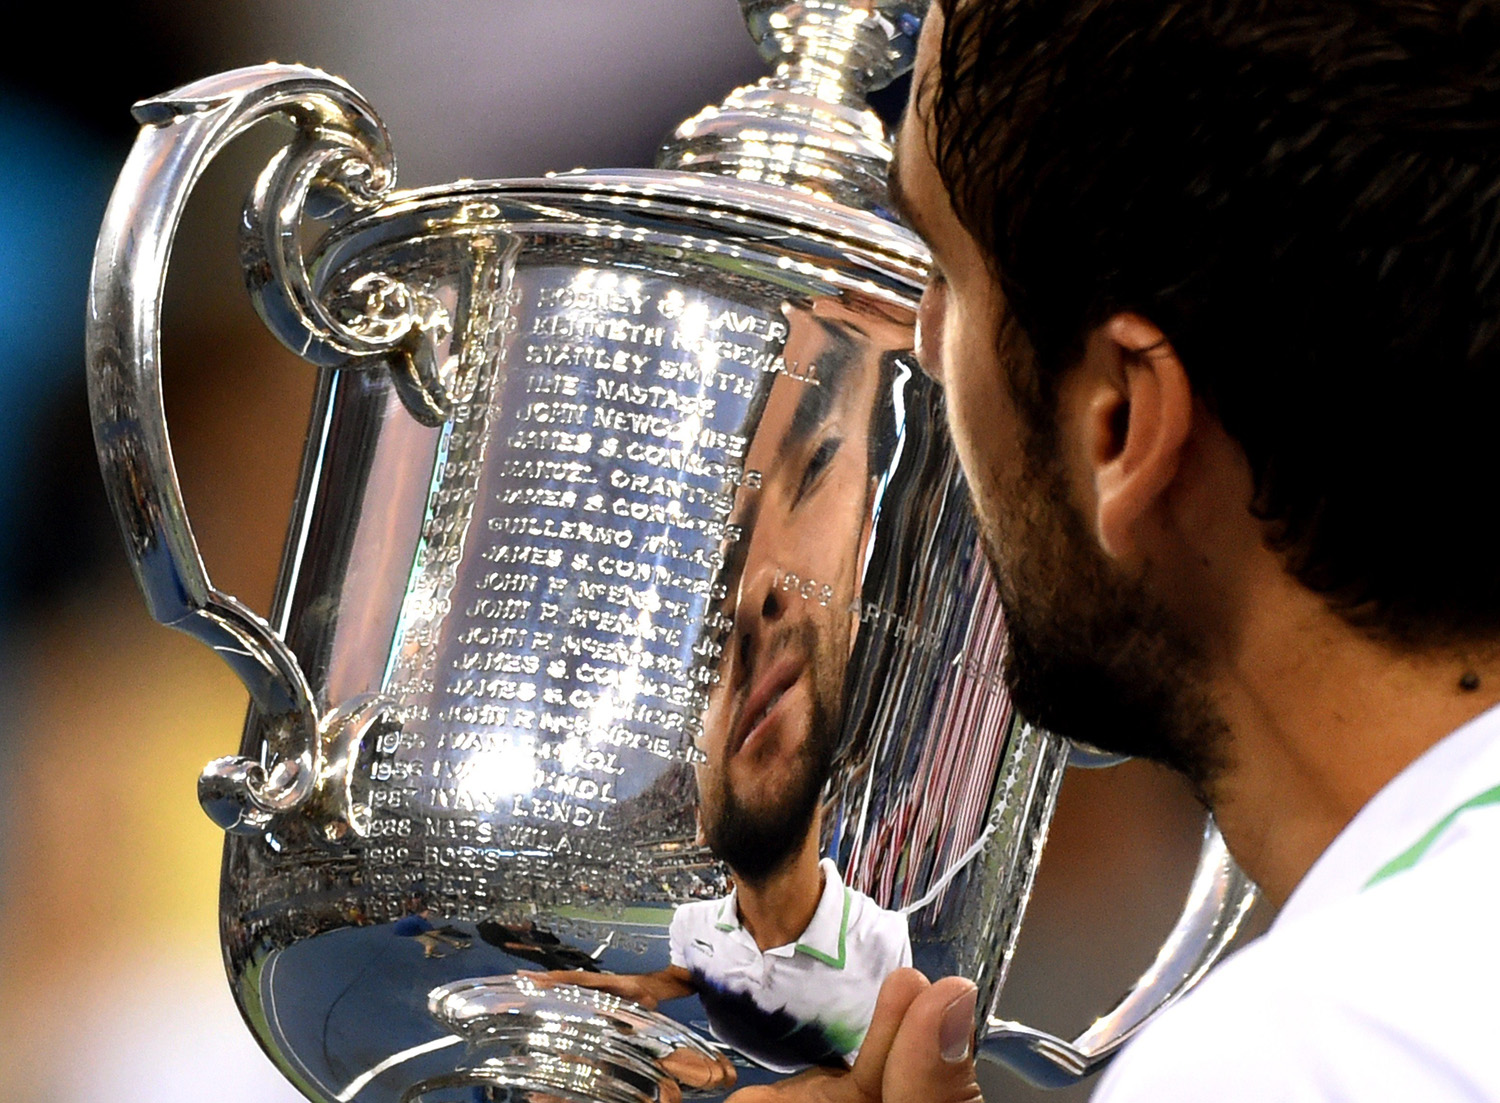 Marin Cilic of Croatia holds his trophy after defeating Kei Nishikori  of Japan during their 2014 US Open men's singles  finals match at the USTA Billie Jean King National Tennis Center on Sept. 8, 2014 in New York.